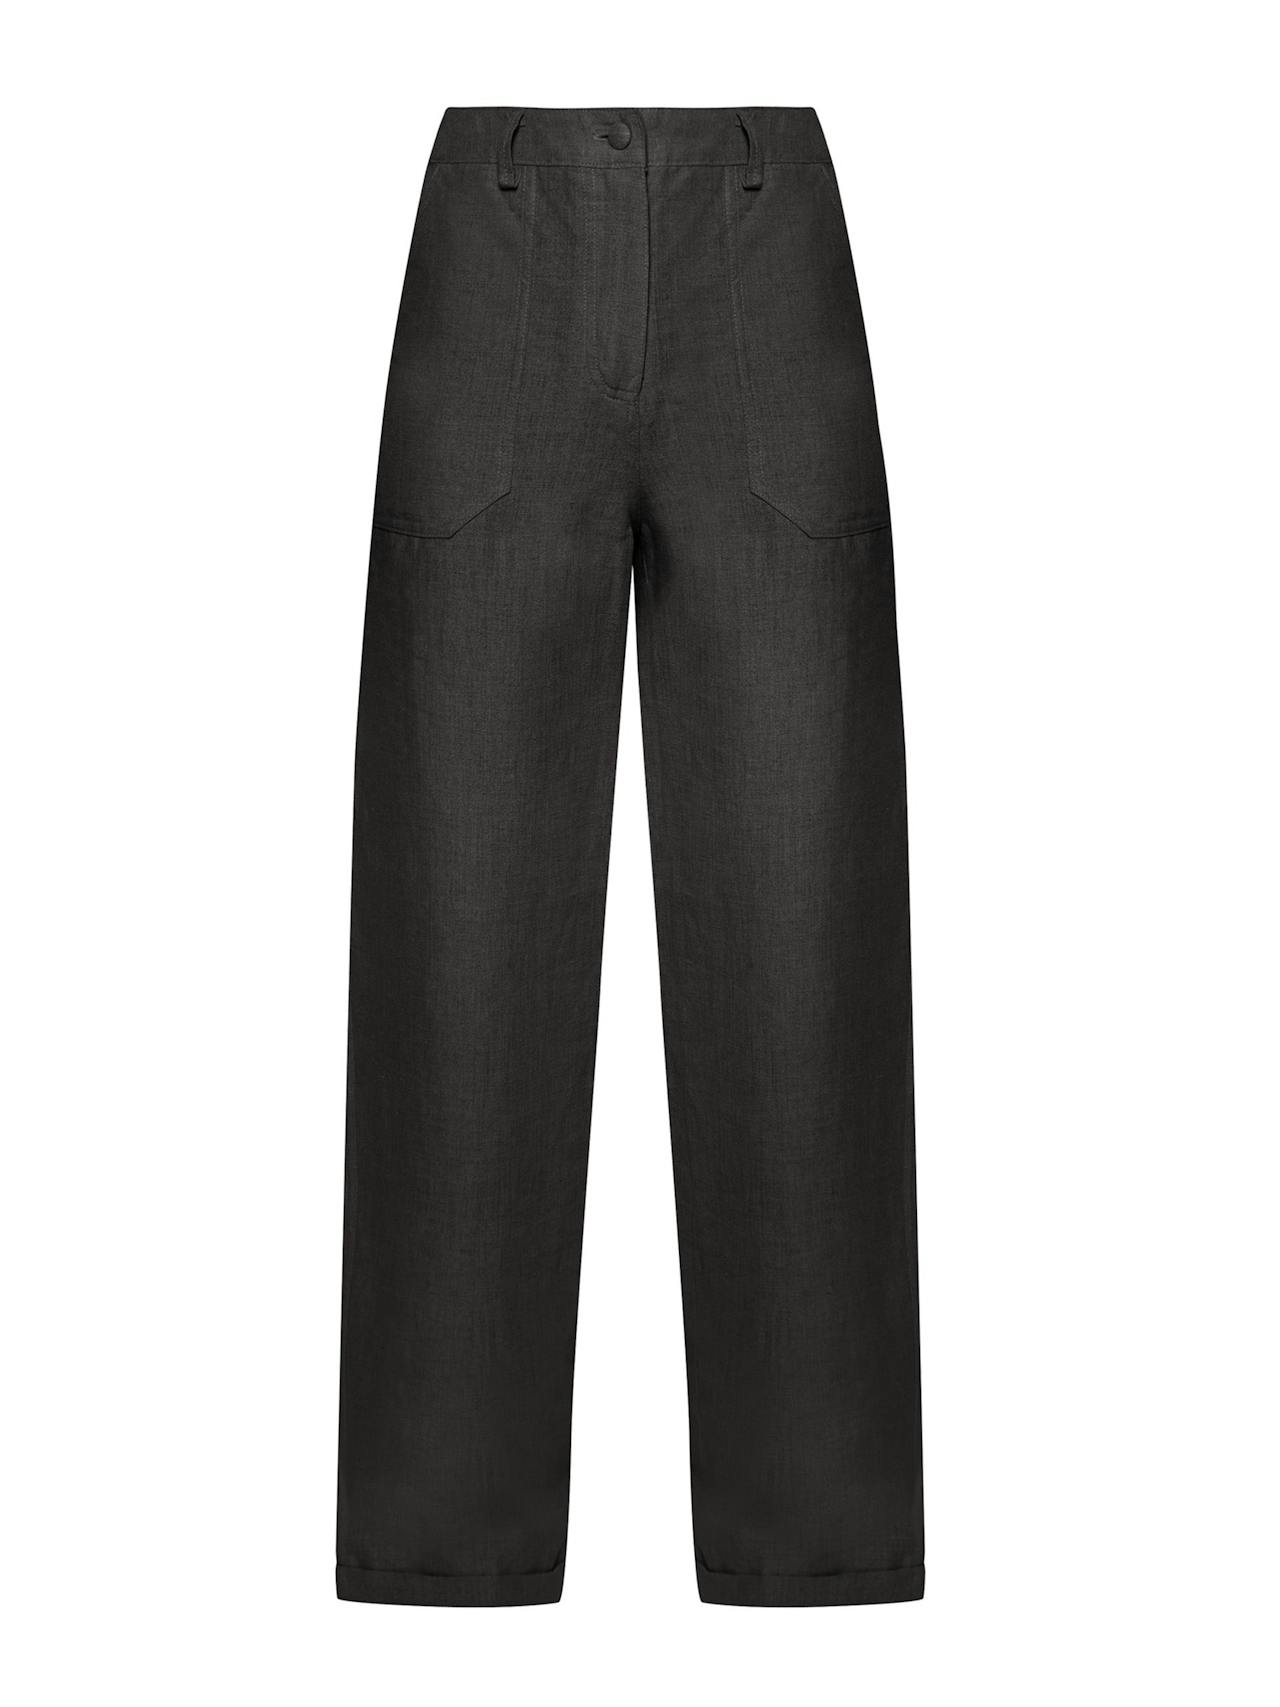 Charcoal Abril trousers